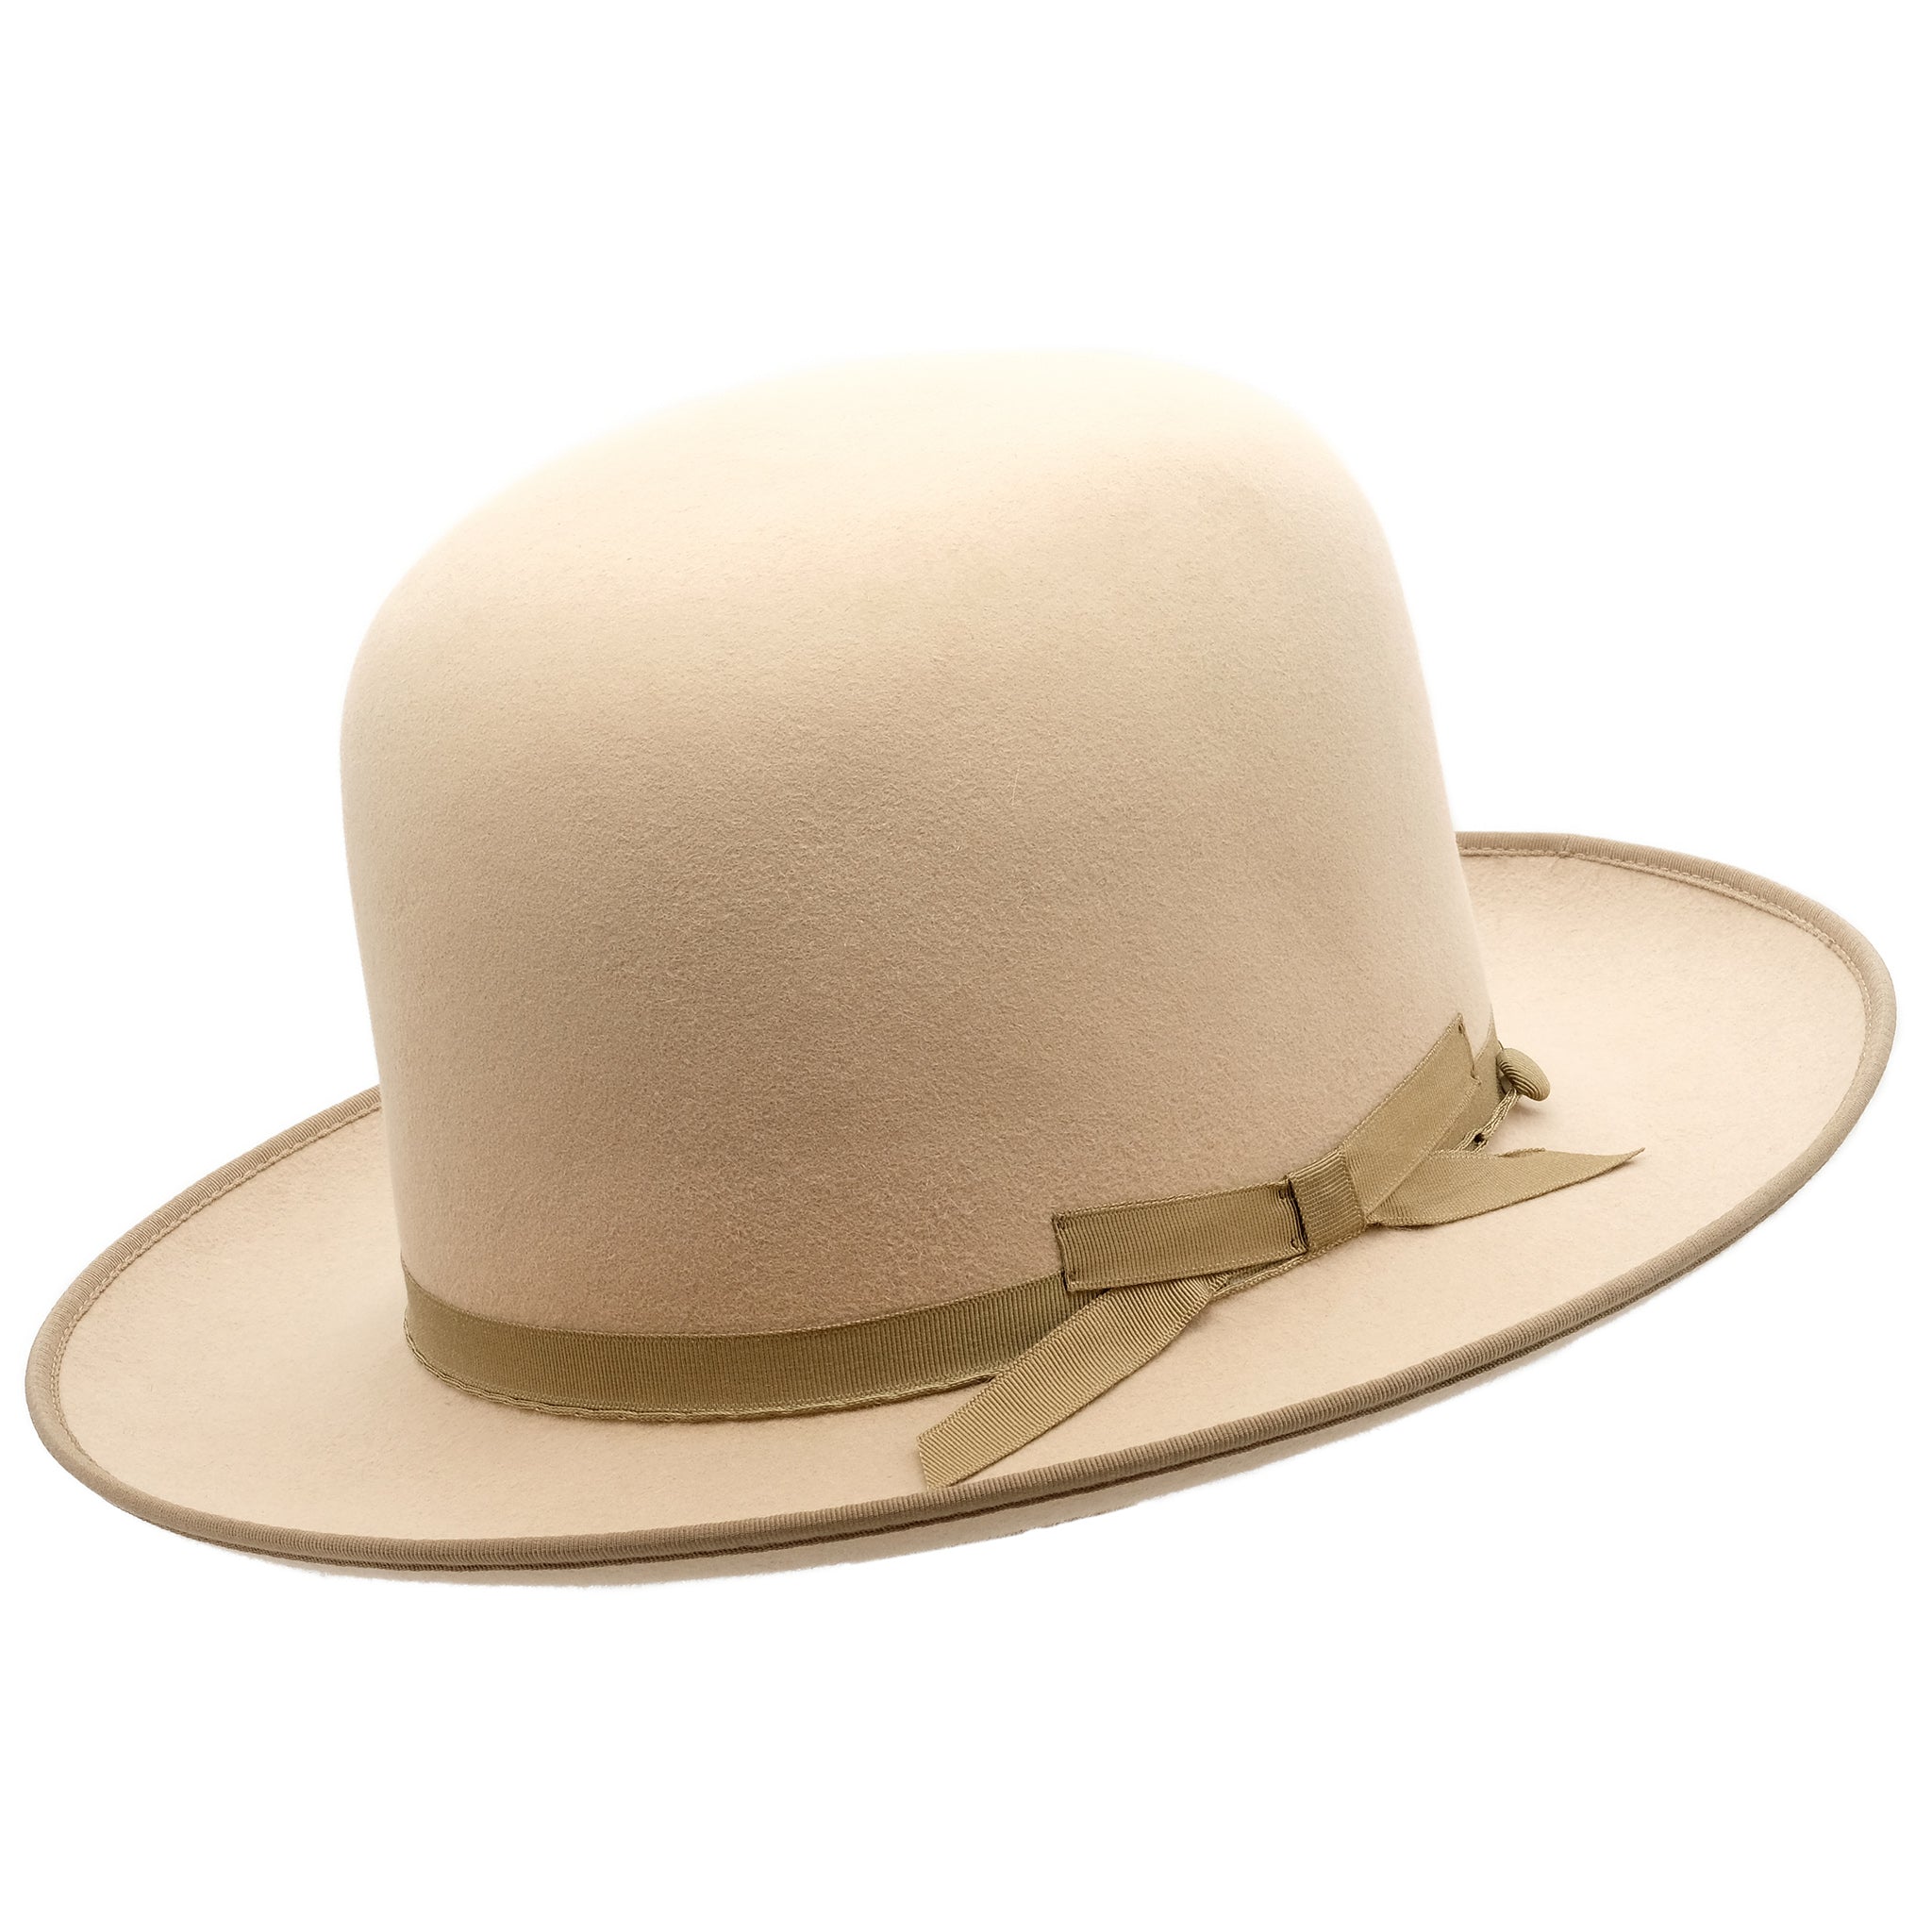 Angle view of Akubra Campdraft in Silver Belly Sand colour, shown with an open crown